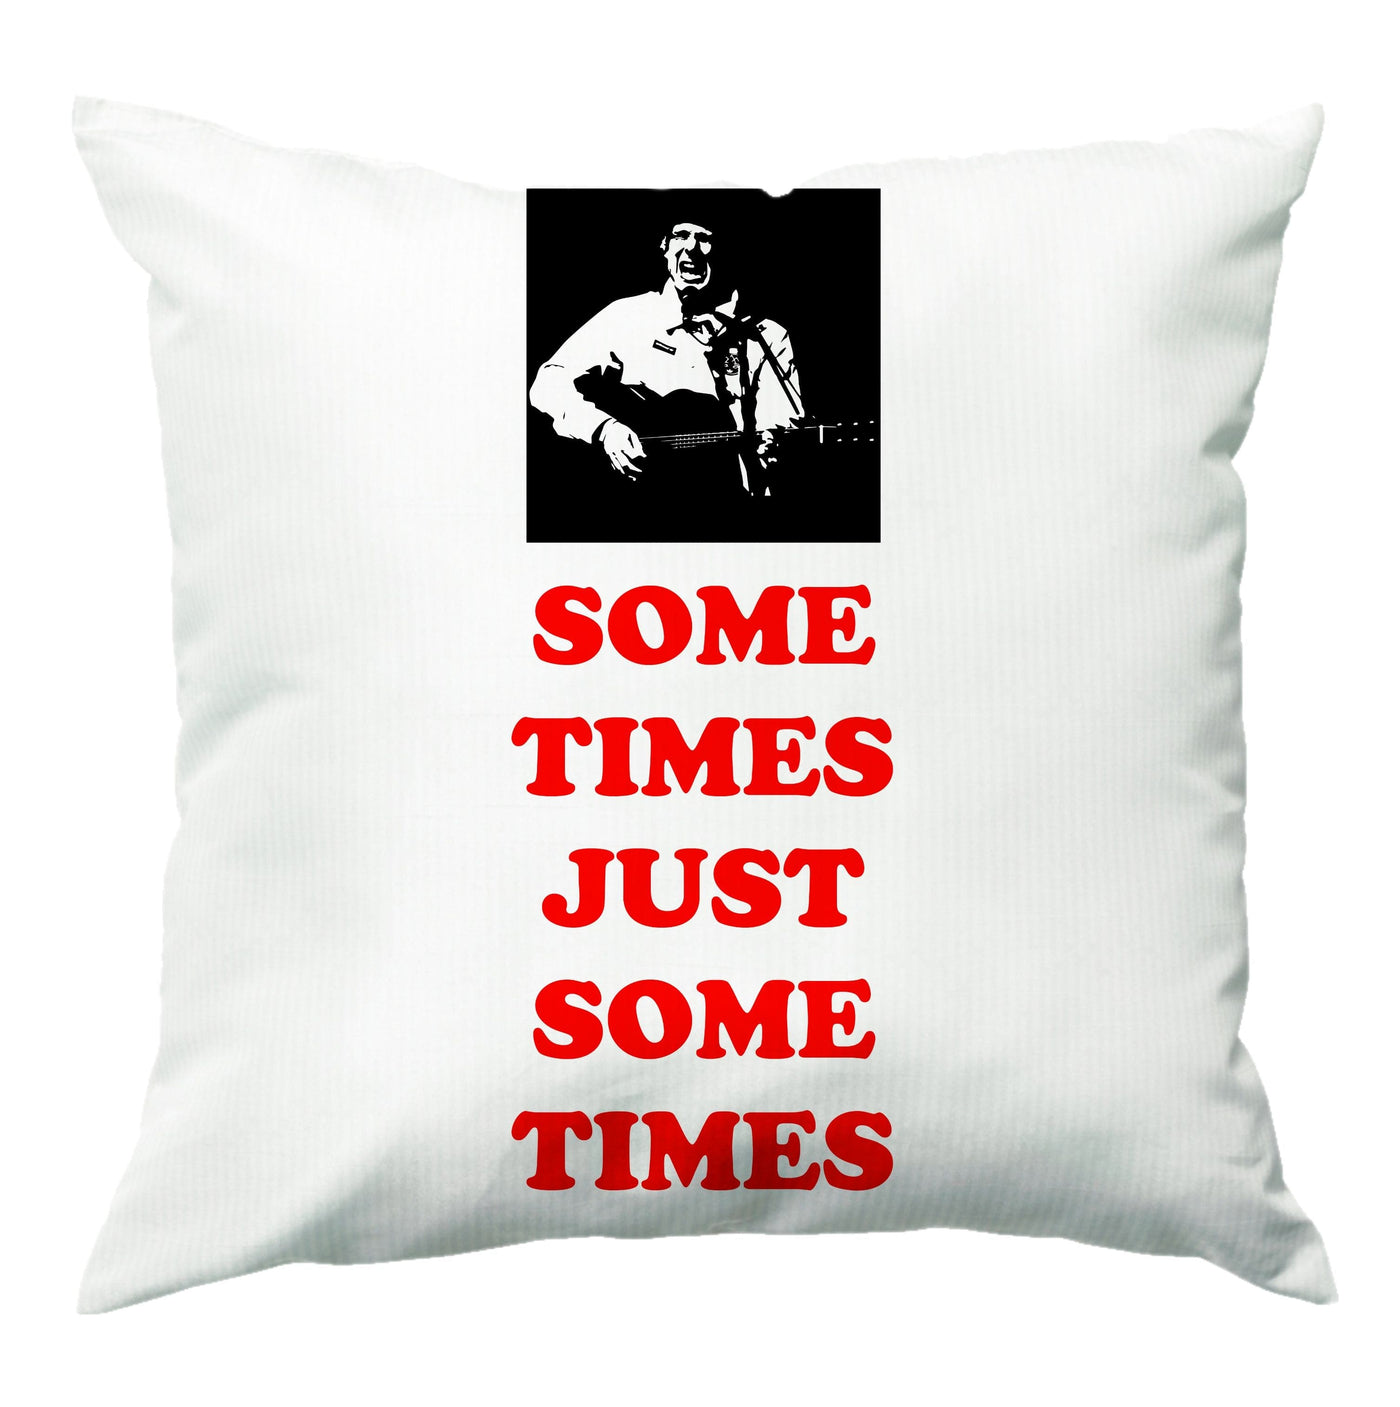 Some Times Just Some Times - Festival Cushion